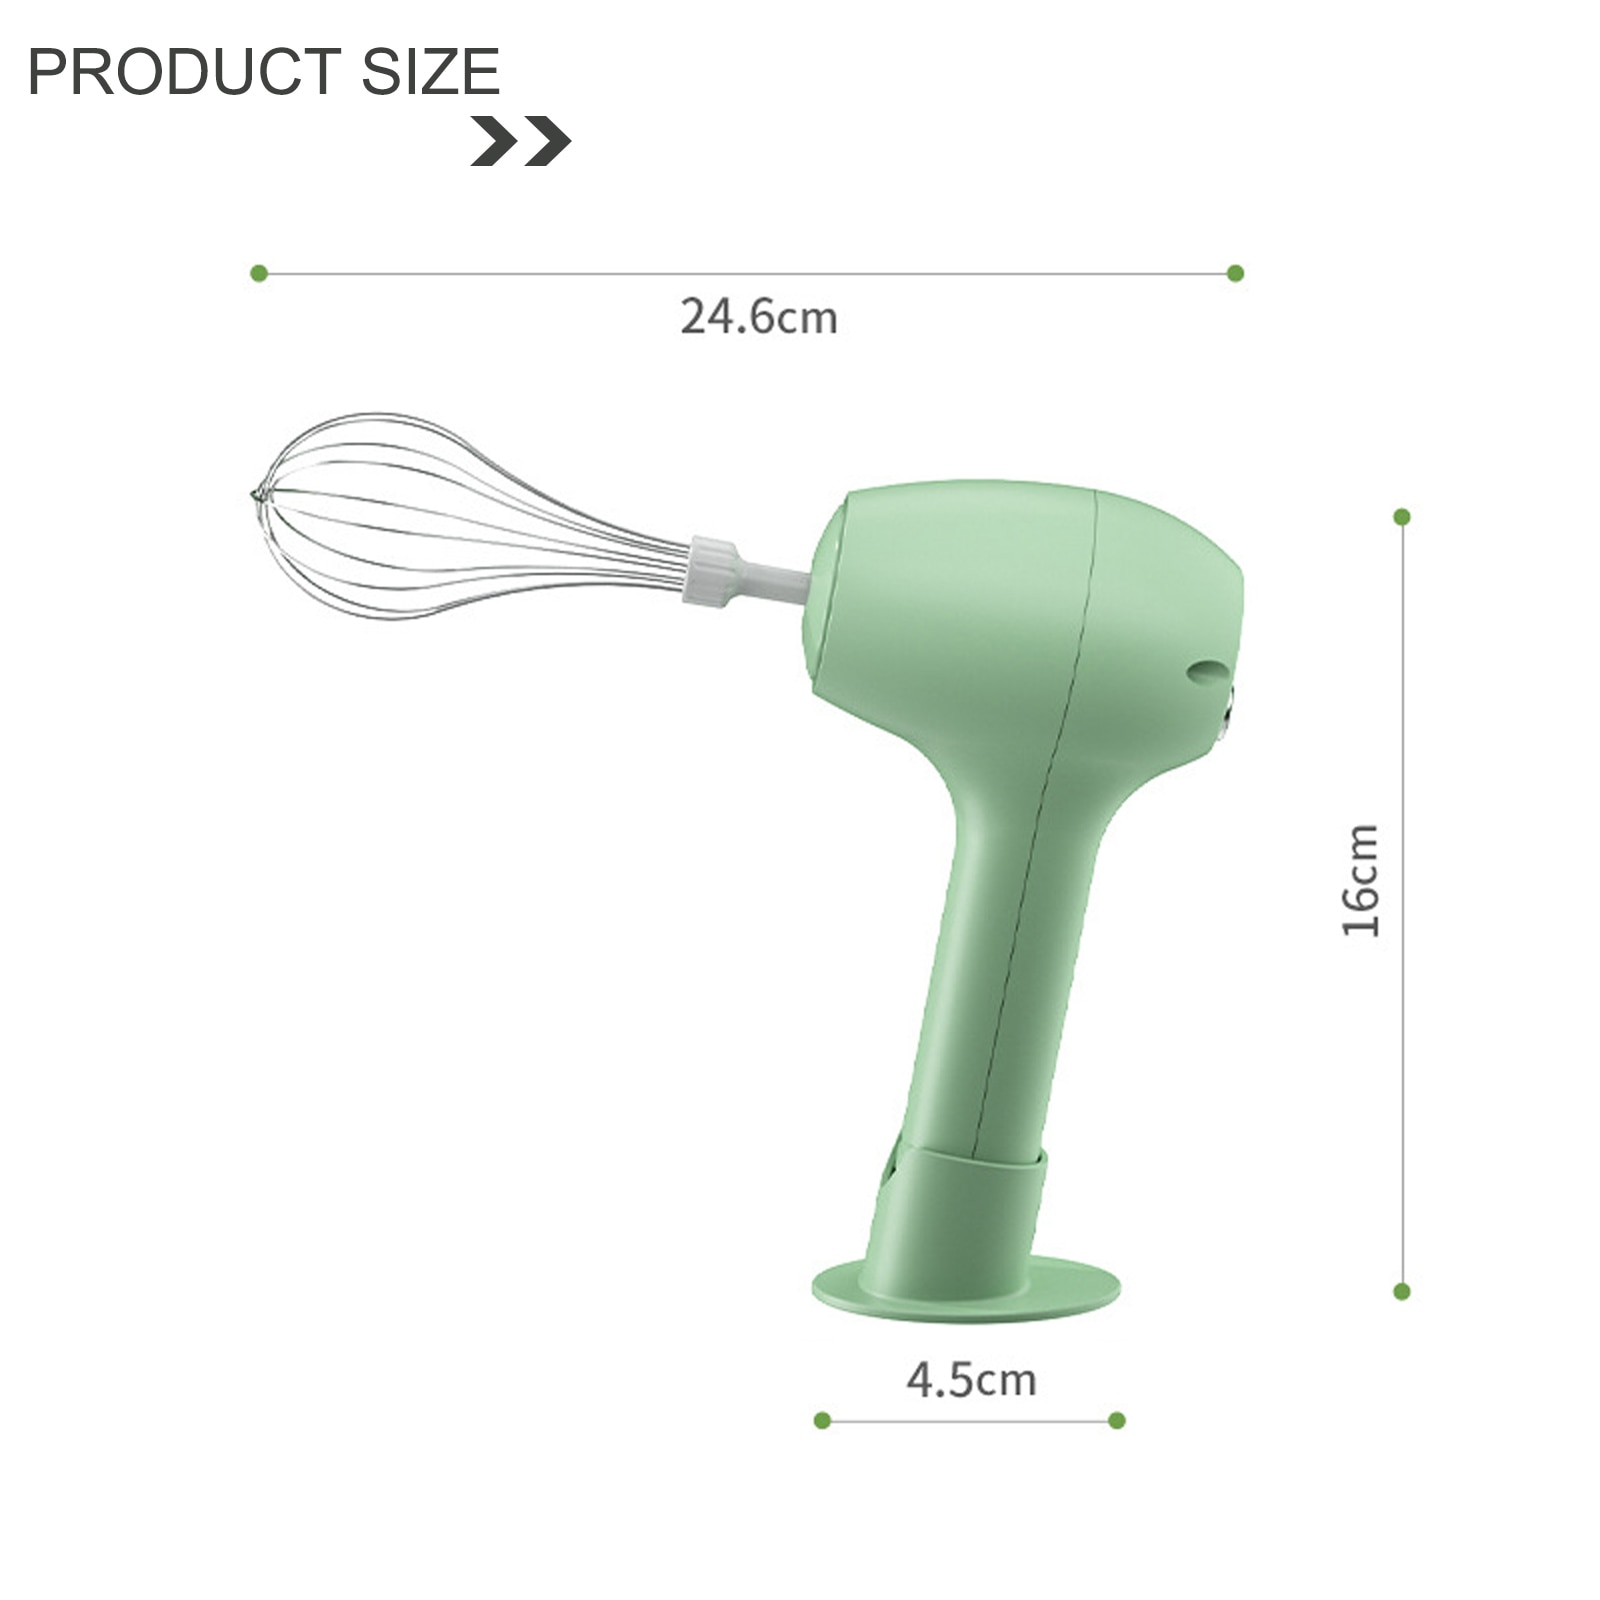 Wireless Portable Electric Food Mixer 3 Speeds Automatic Whisk Dough Egg Beater Baking Cake Cream Whipper Kitchen Hand Blender